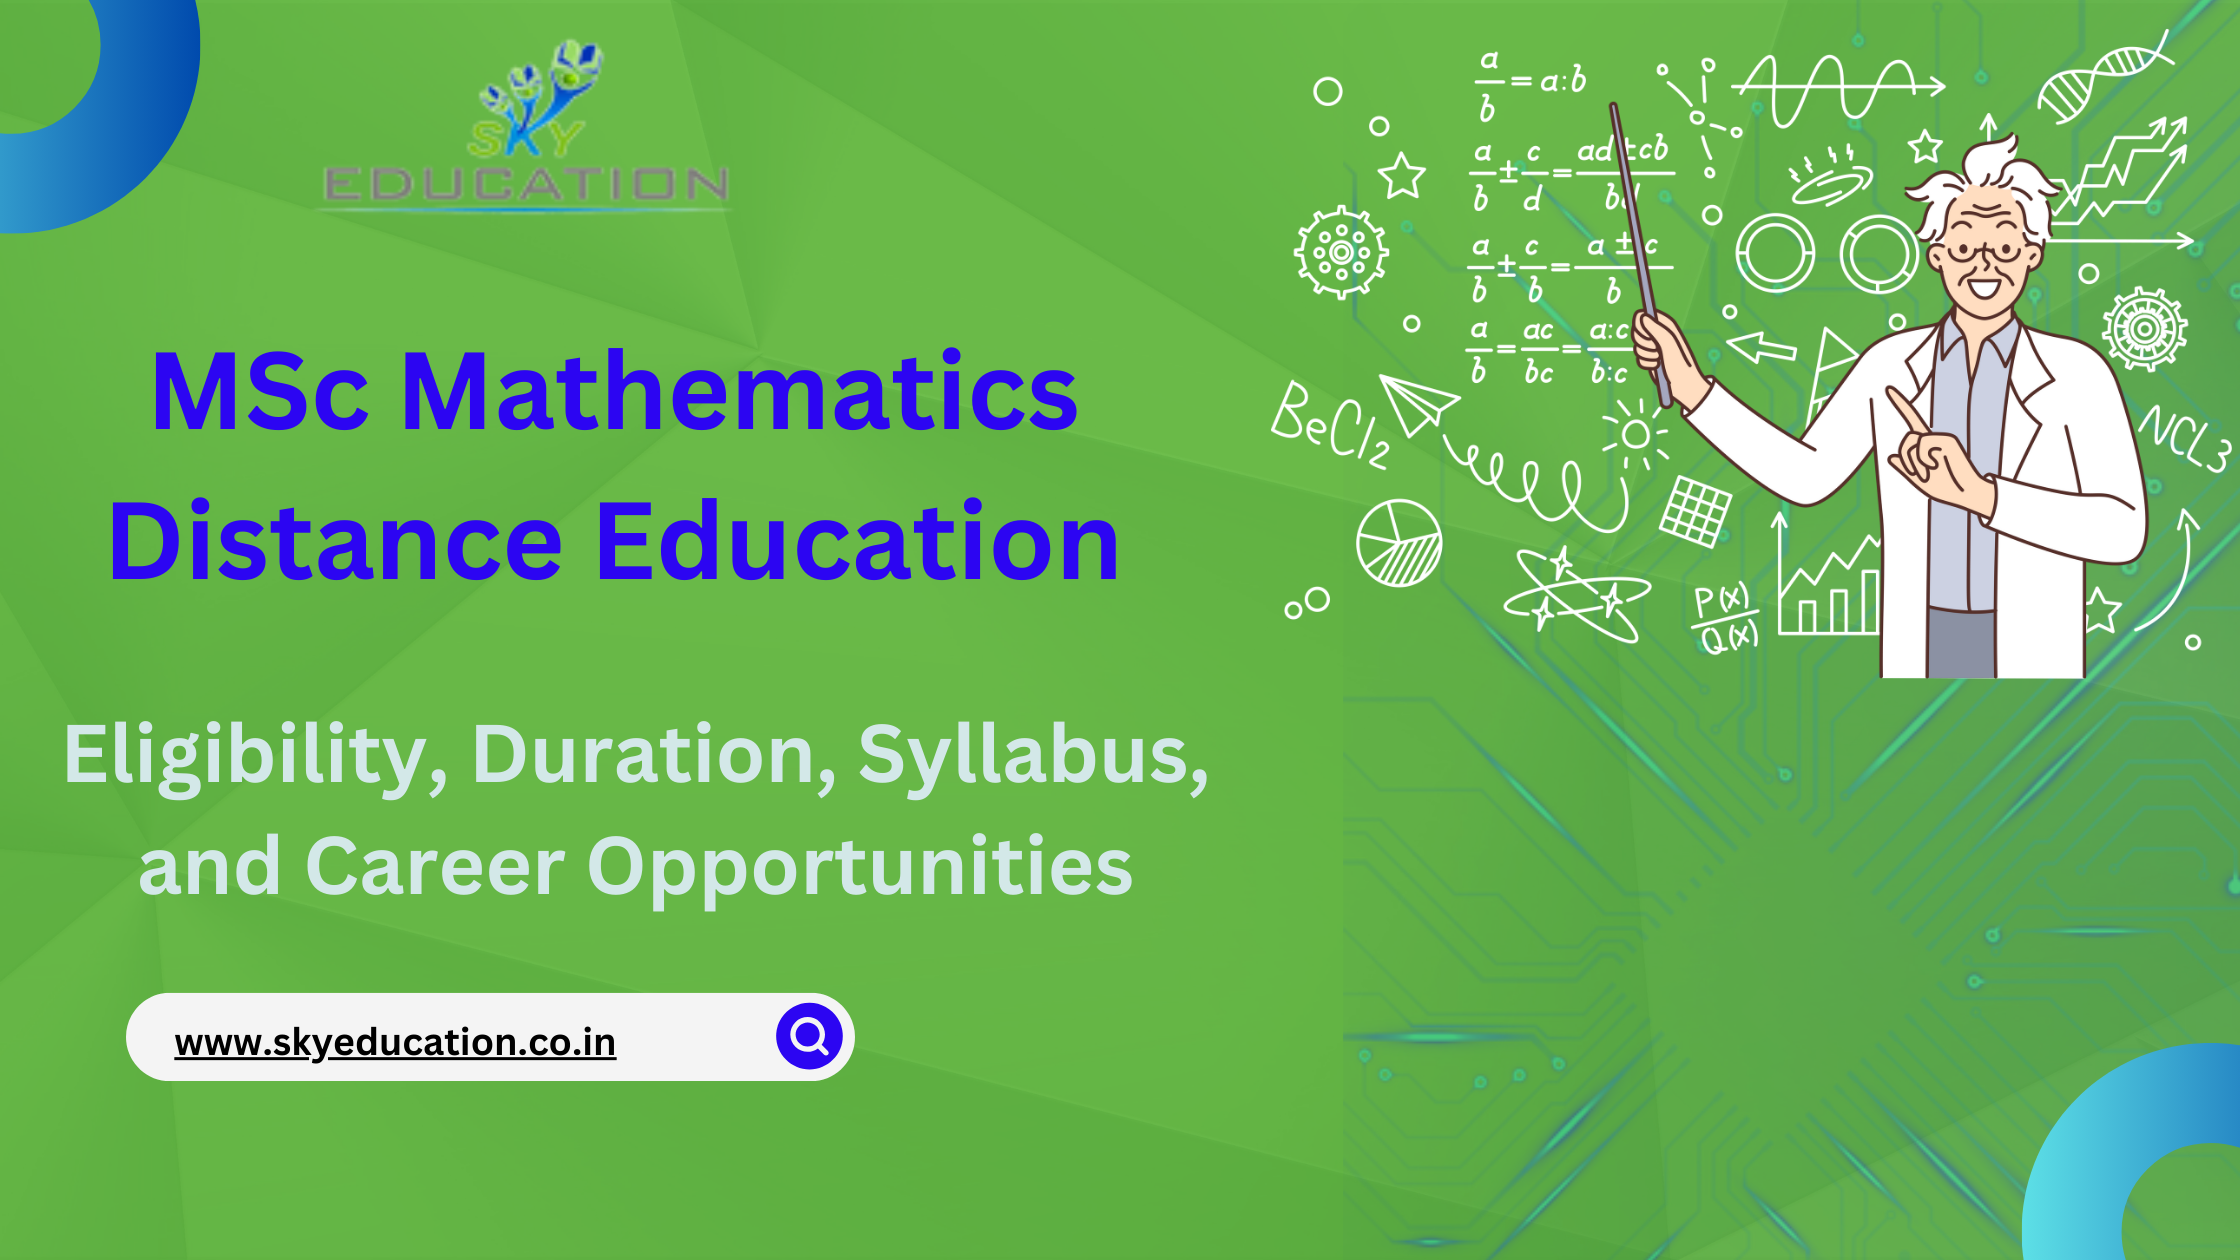 MSc Mathematics Distance Education - Admission, Eligibility, and Career Prospects